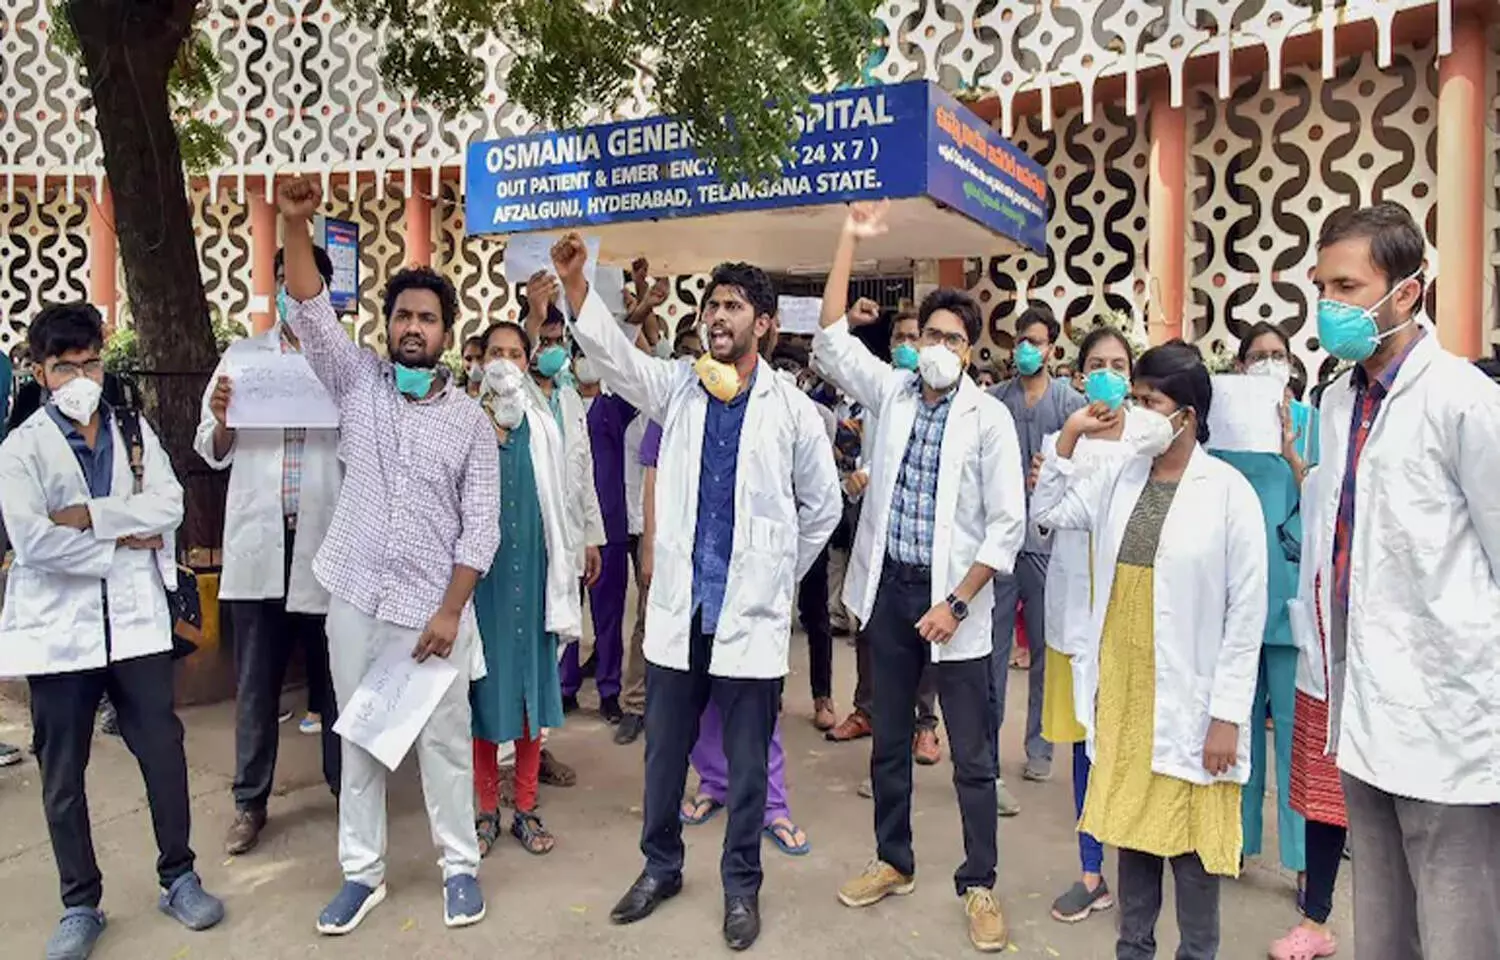 Osmania General Hospital: Junior doctors protest over lack of facilities to treat patients